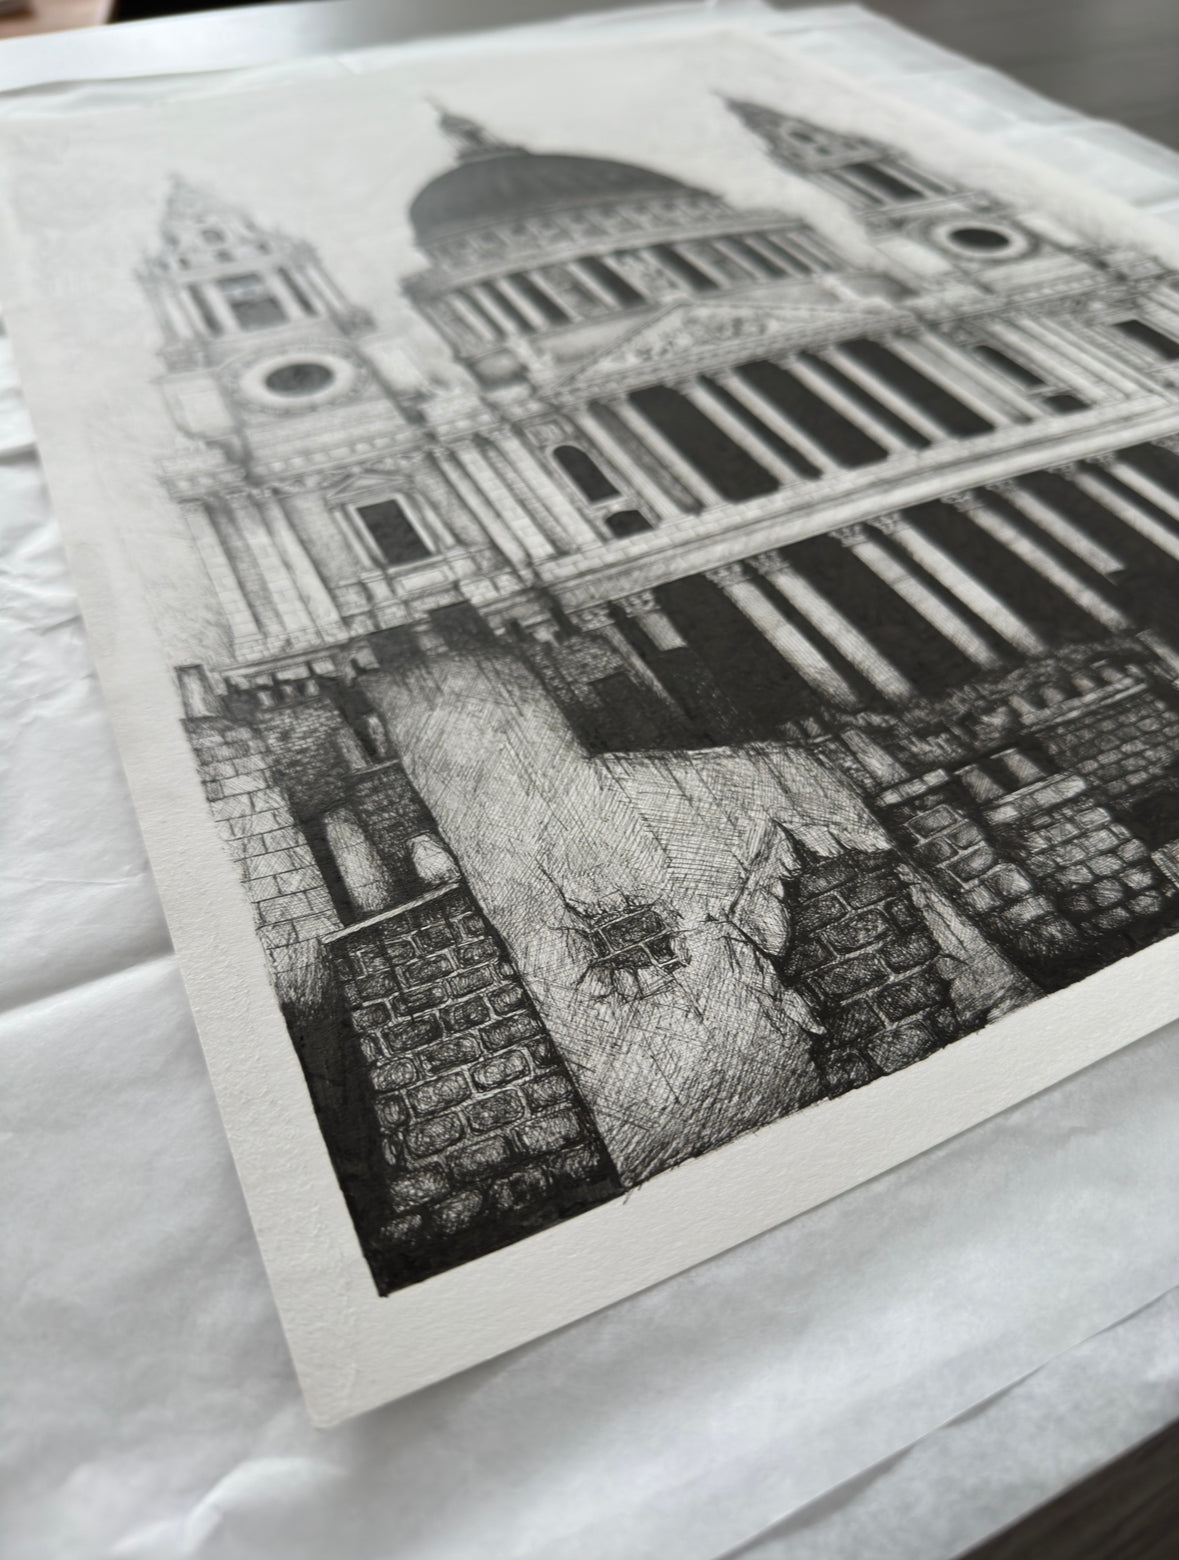 St Paul’s Cathedral (Original A2 Drawing)- 2015